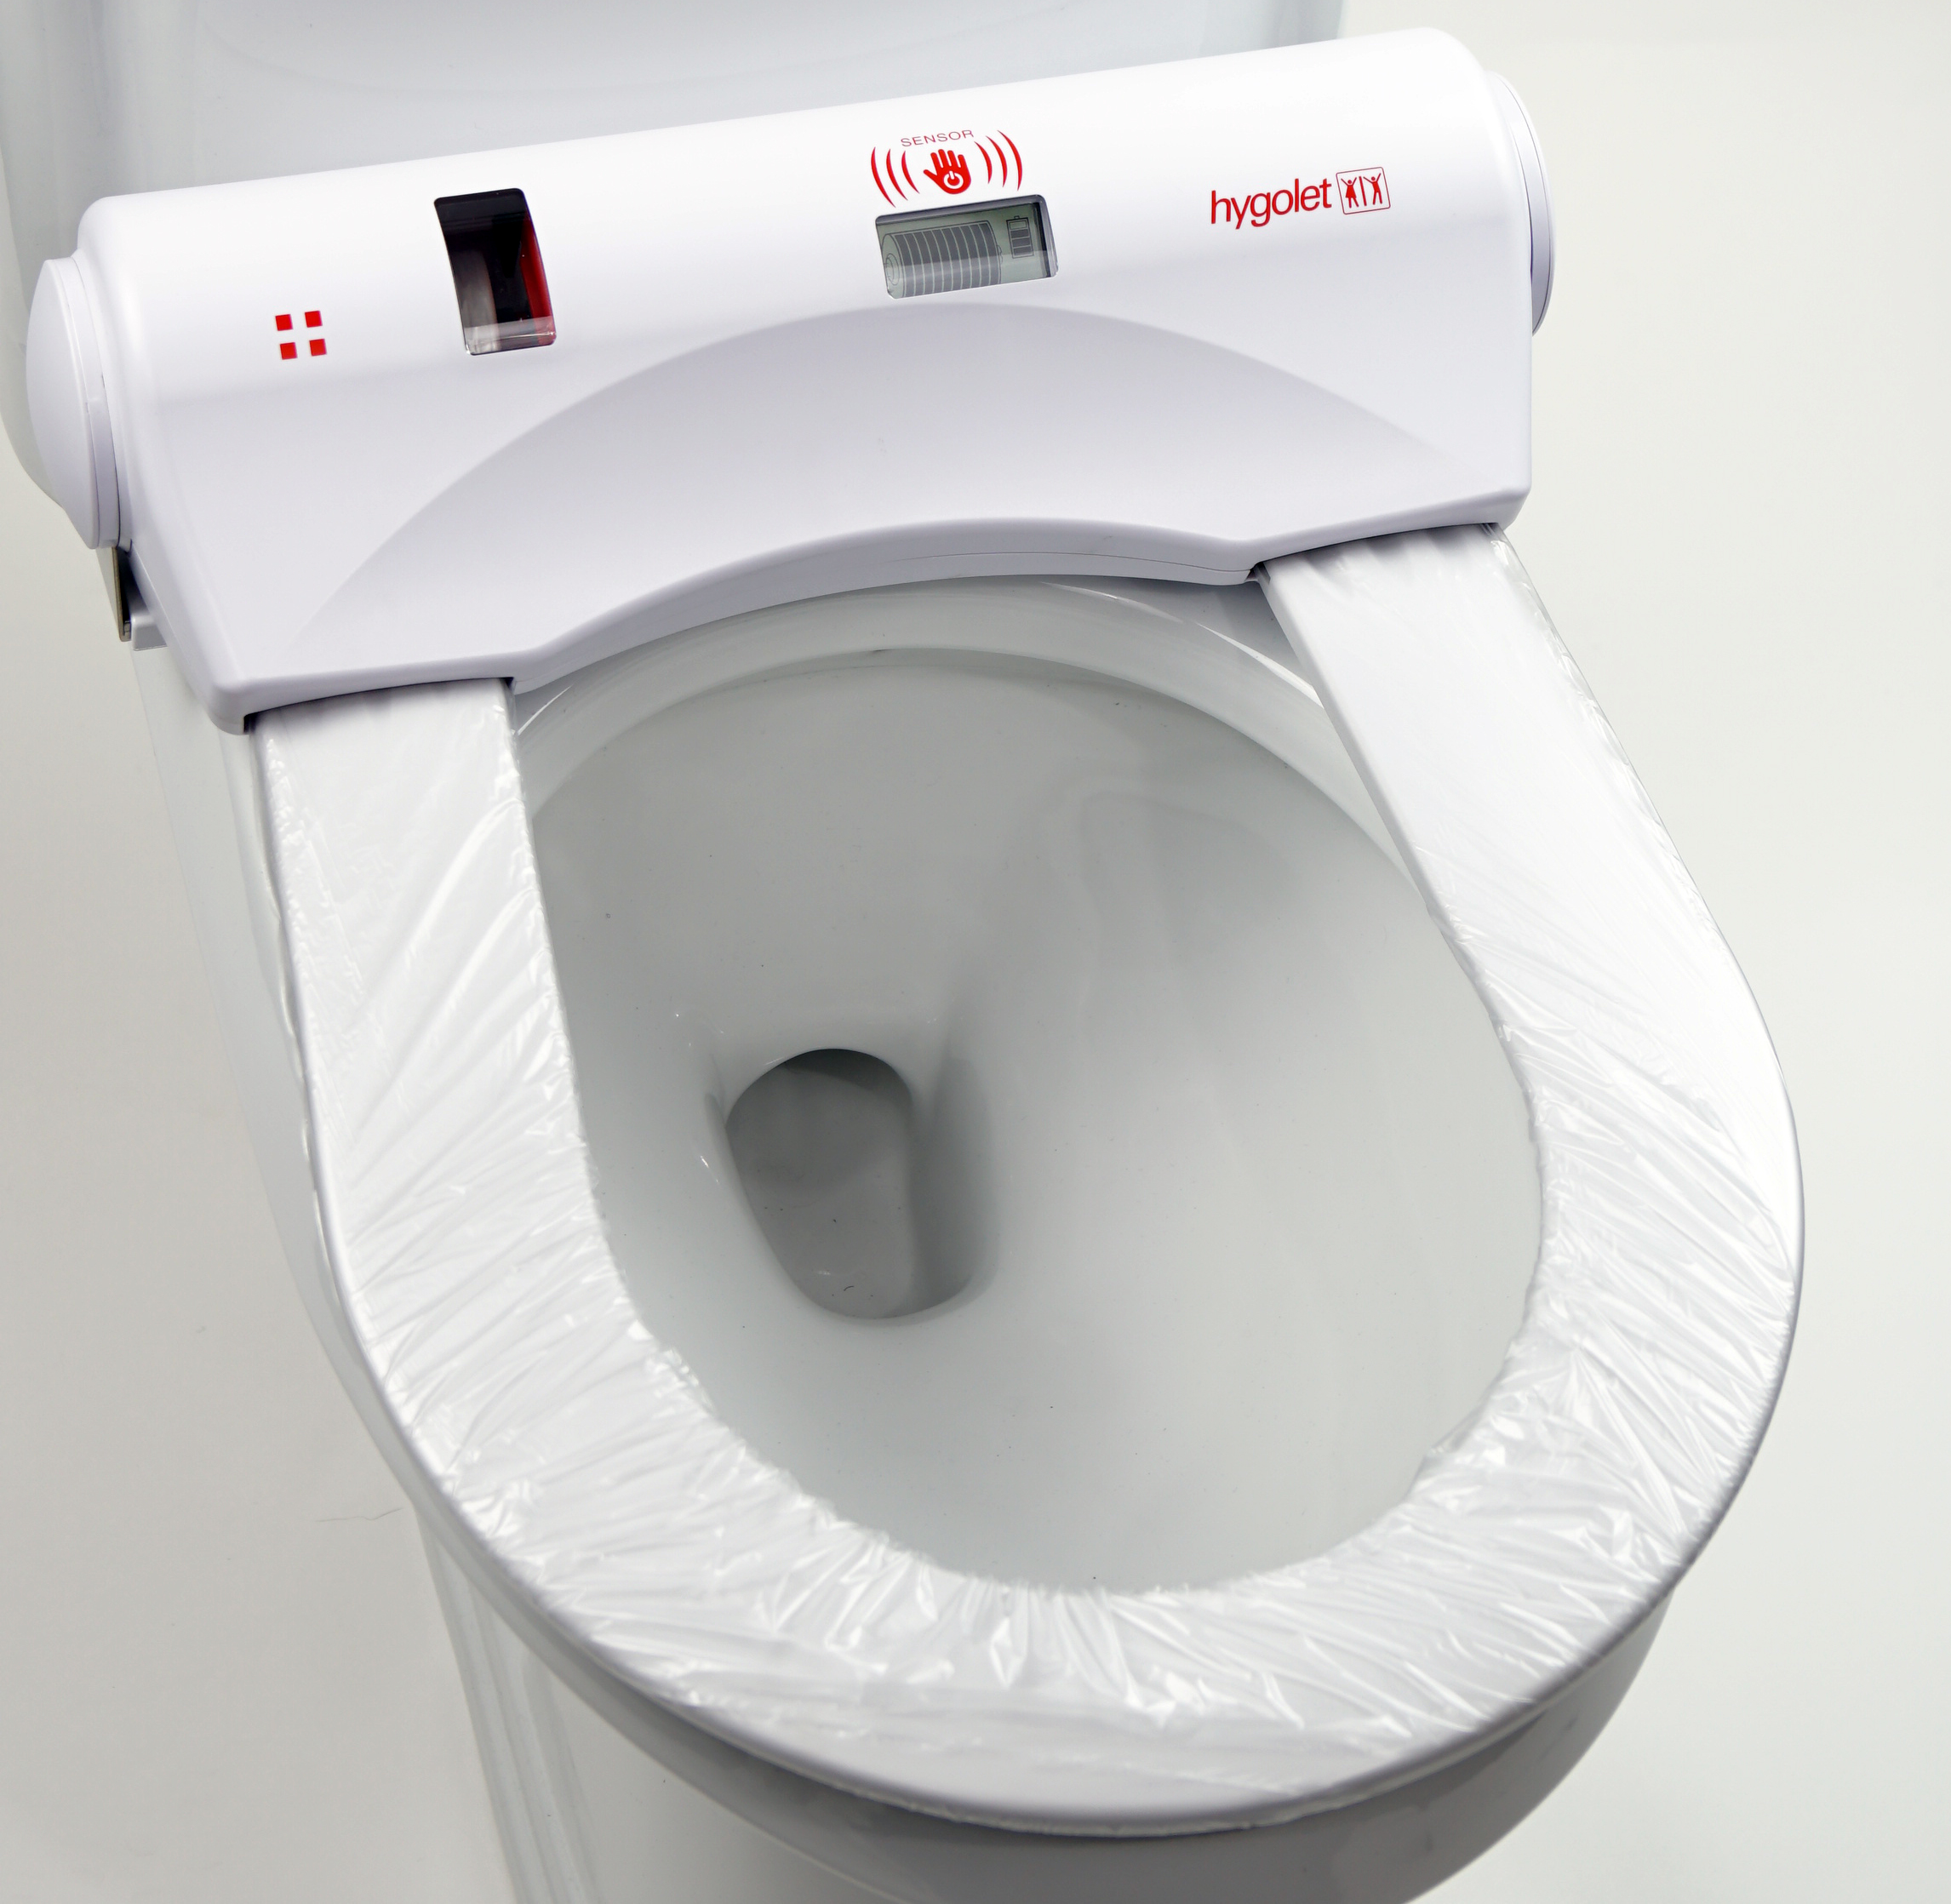 Automatic Toilet Seat Covers Hygolet, Bathroom Seat Covers